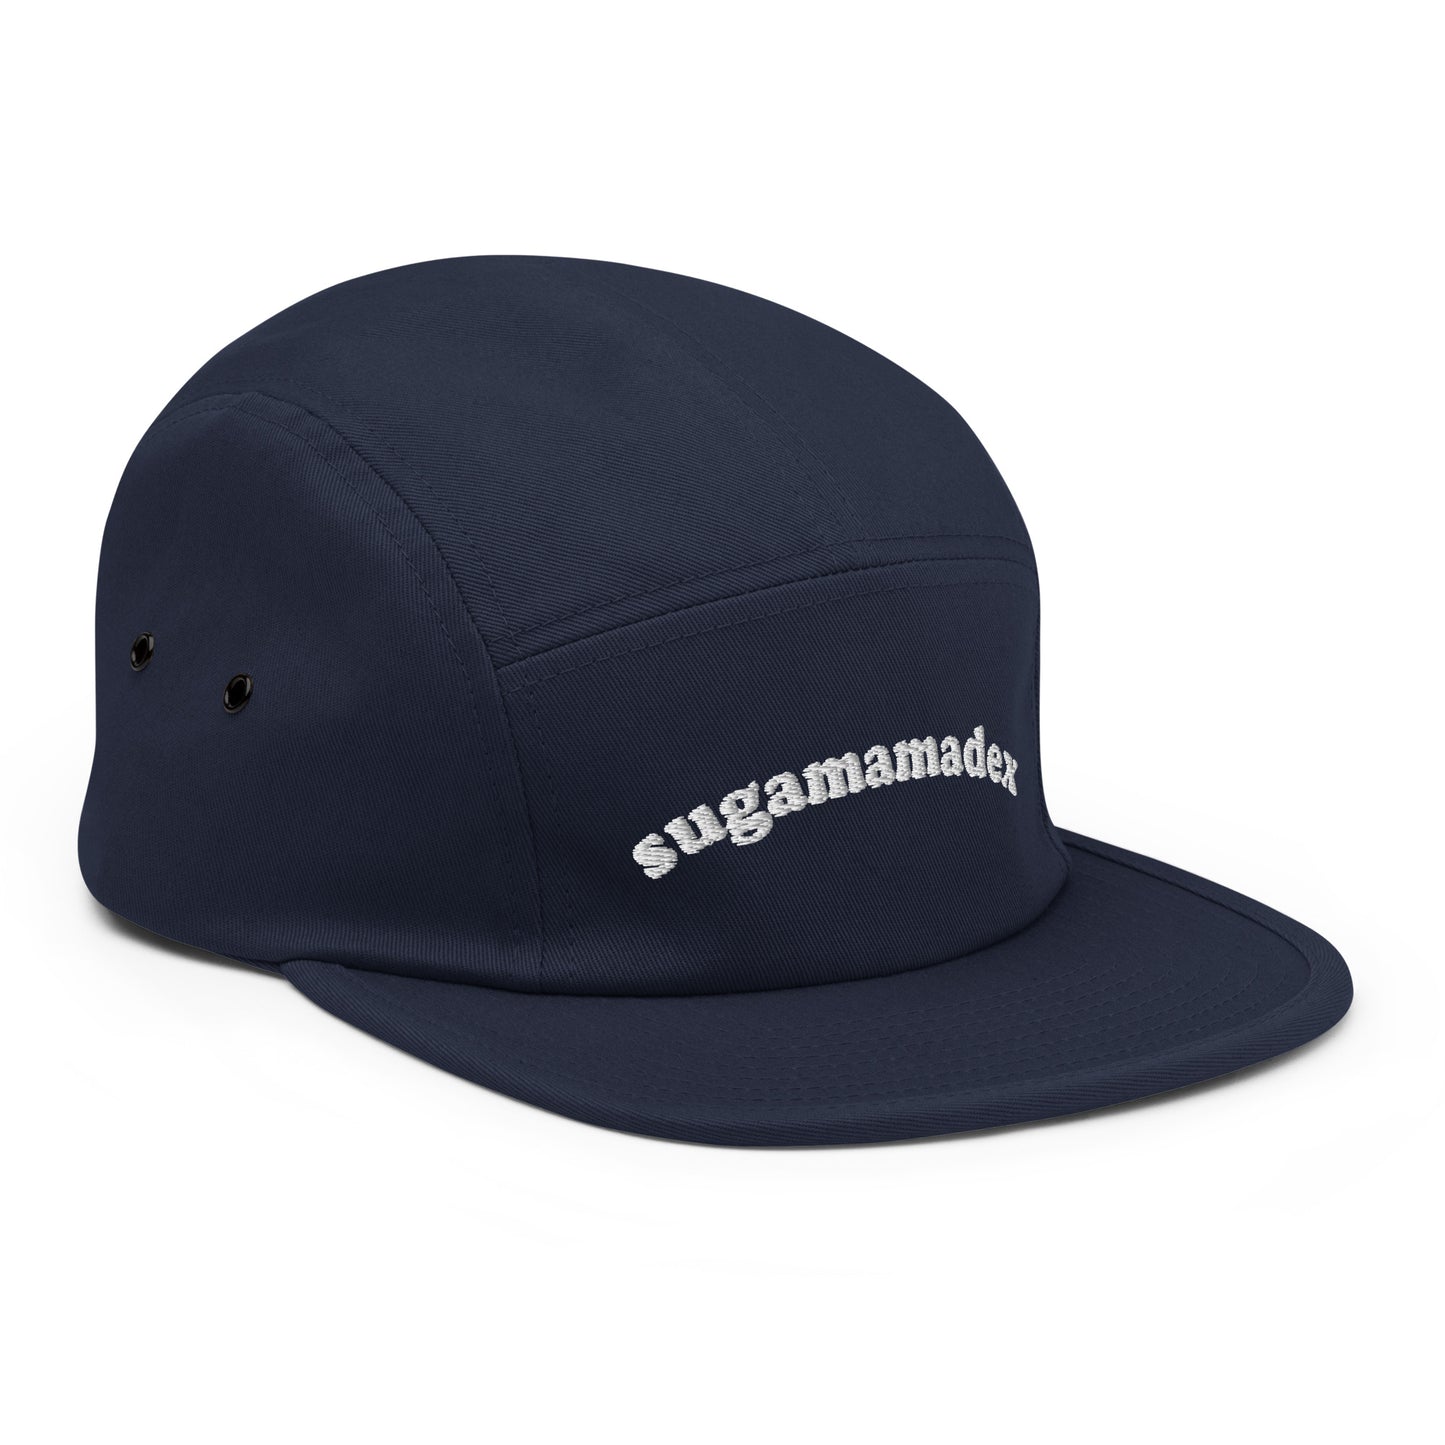 Sugamamadex Embroidered Five Panel Hat